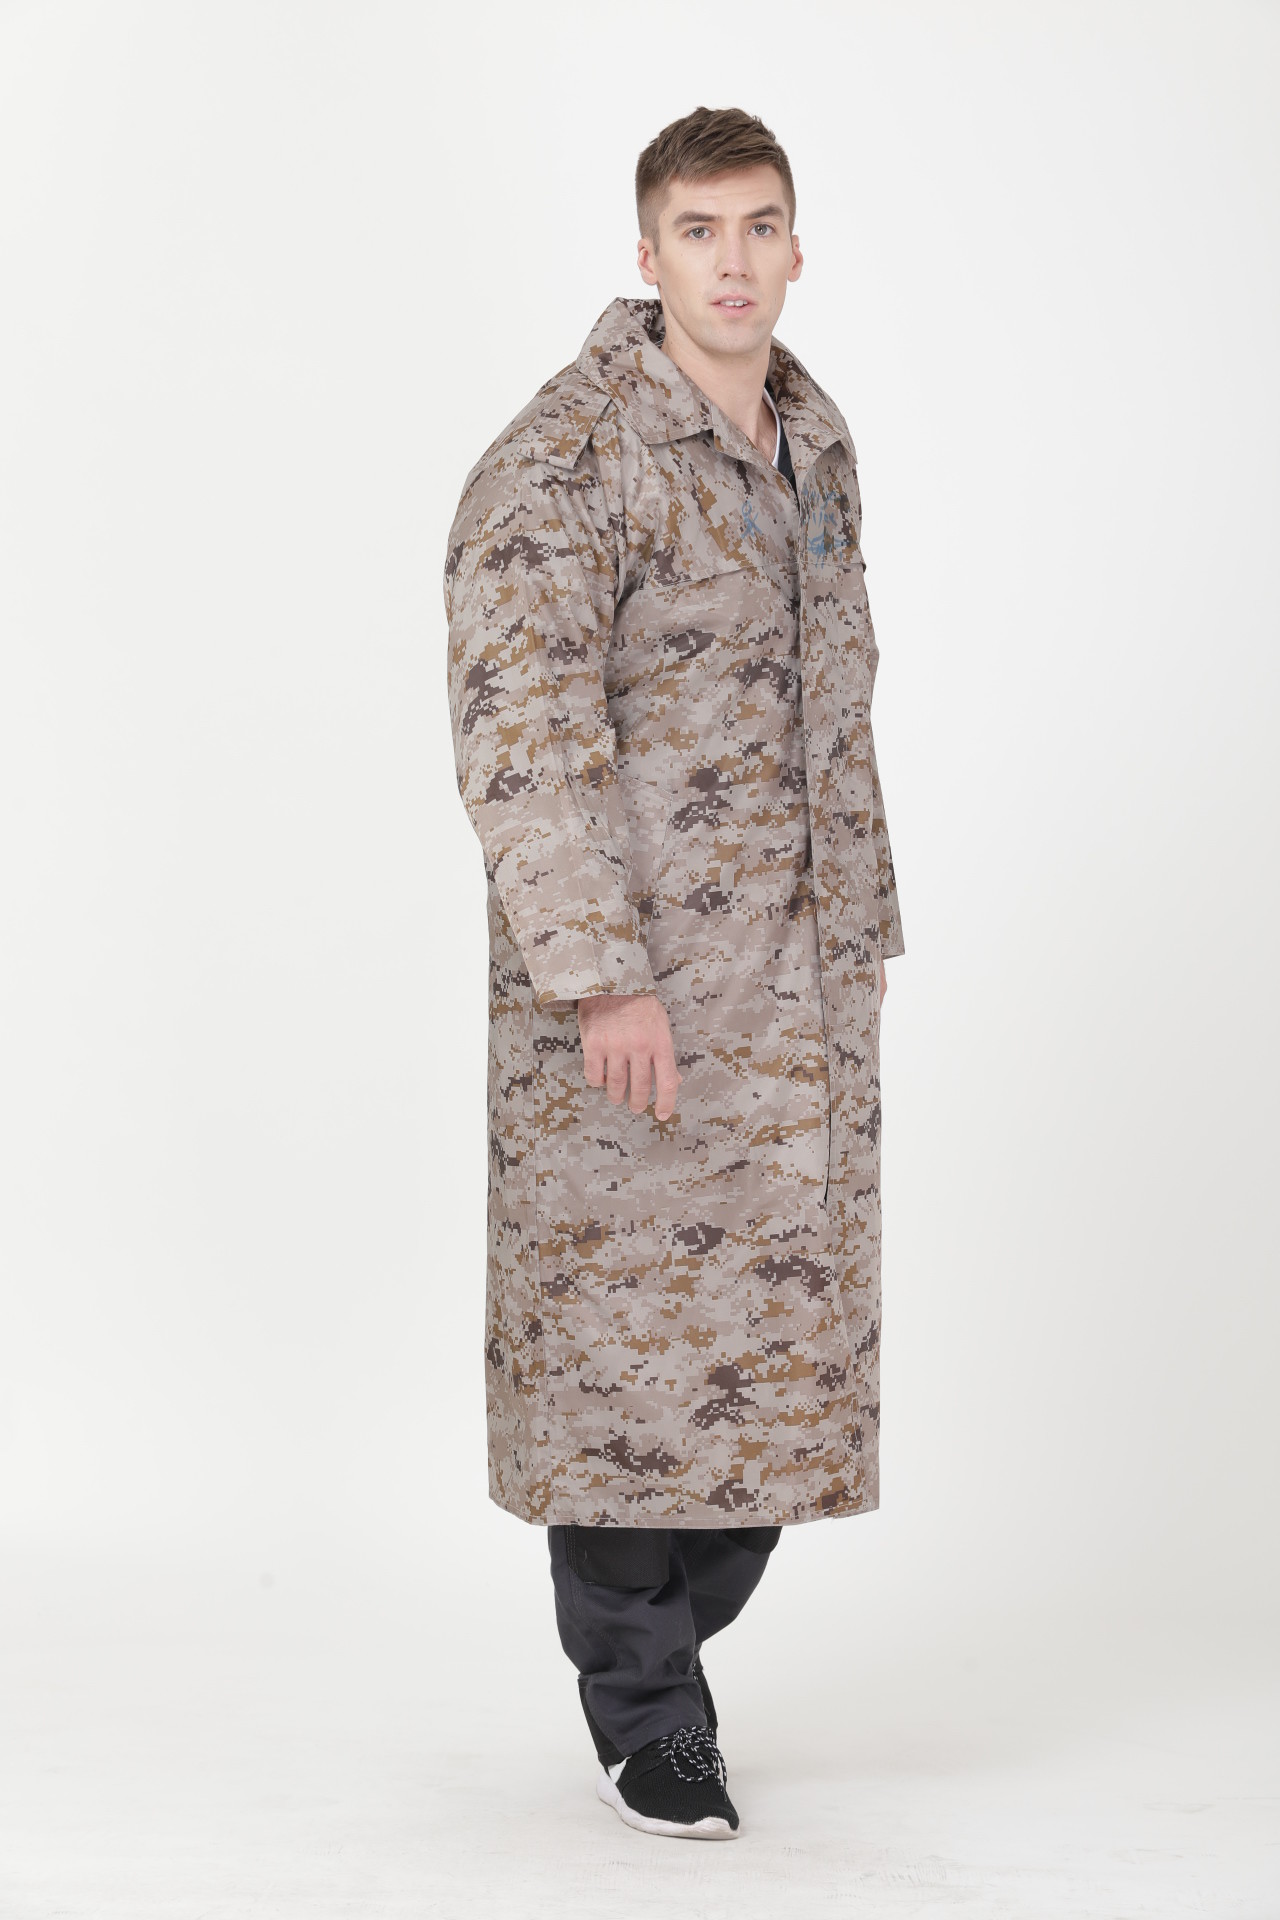 Quality Waterproof Work Clothes Mens Long Raincoat With Hood / Lining Camouflage Printed wholesale